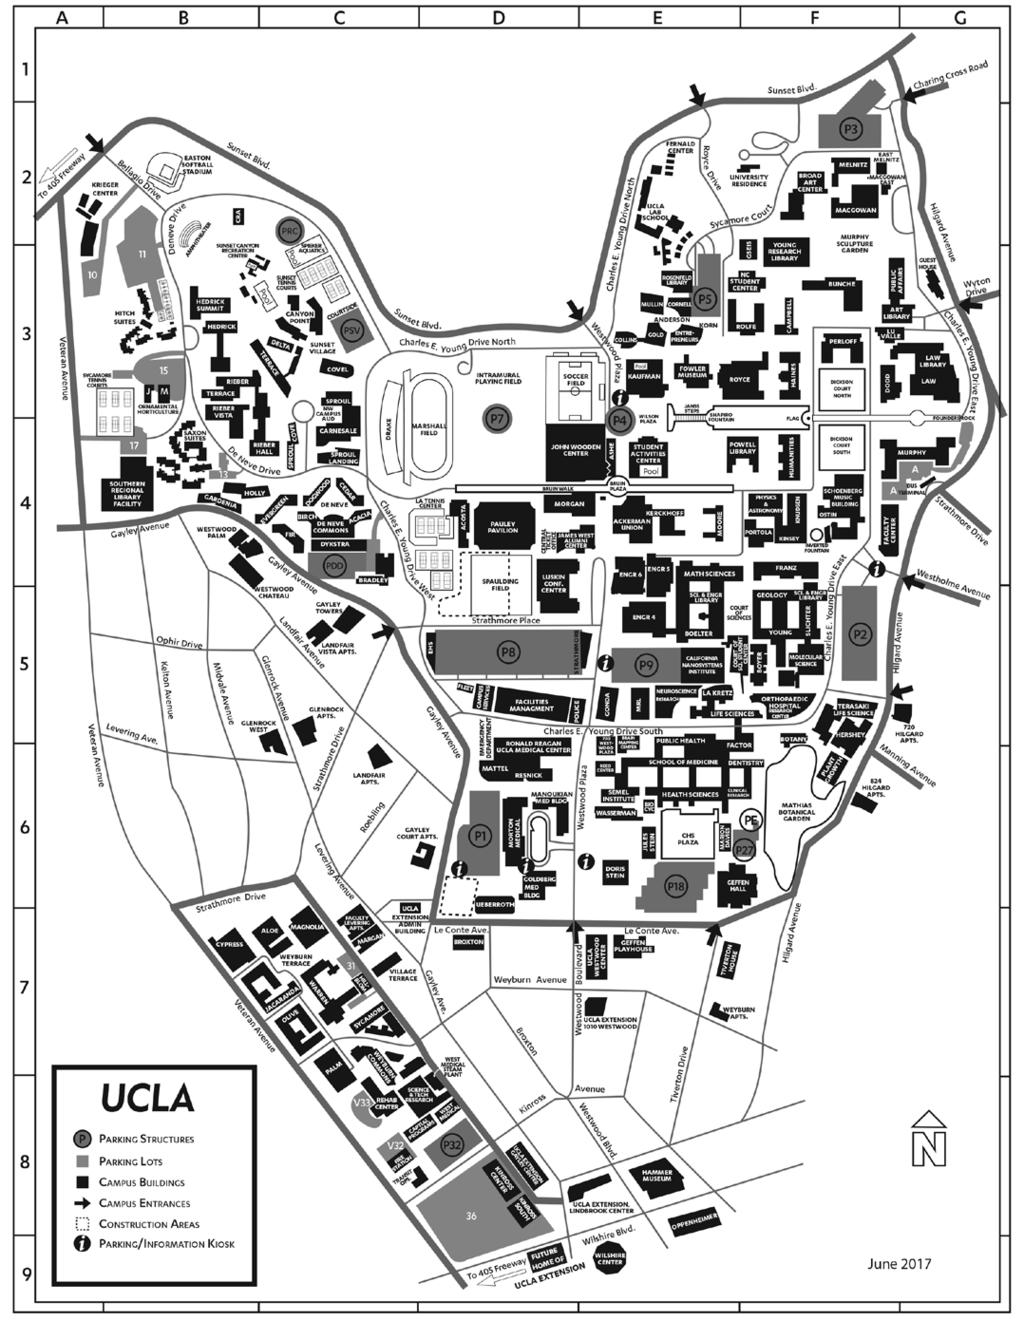 180 Campus Map UCLA Campus & Westwood Village Centers Ackerman Student Union... E4 Acosta Training Center... D4 Anderson (Complex)... E3 Boelter Hall... E5 Botany... F5 Broad Art Center.